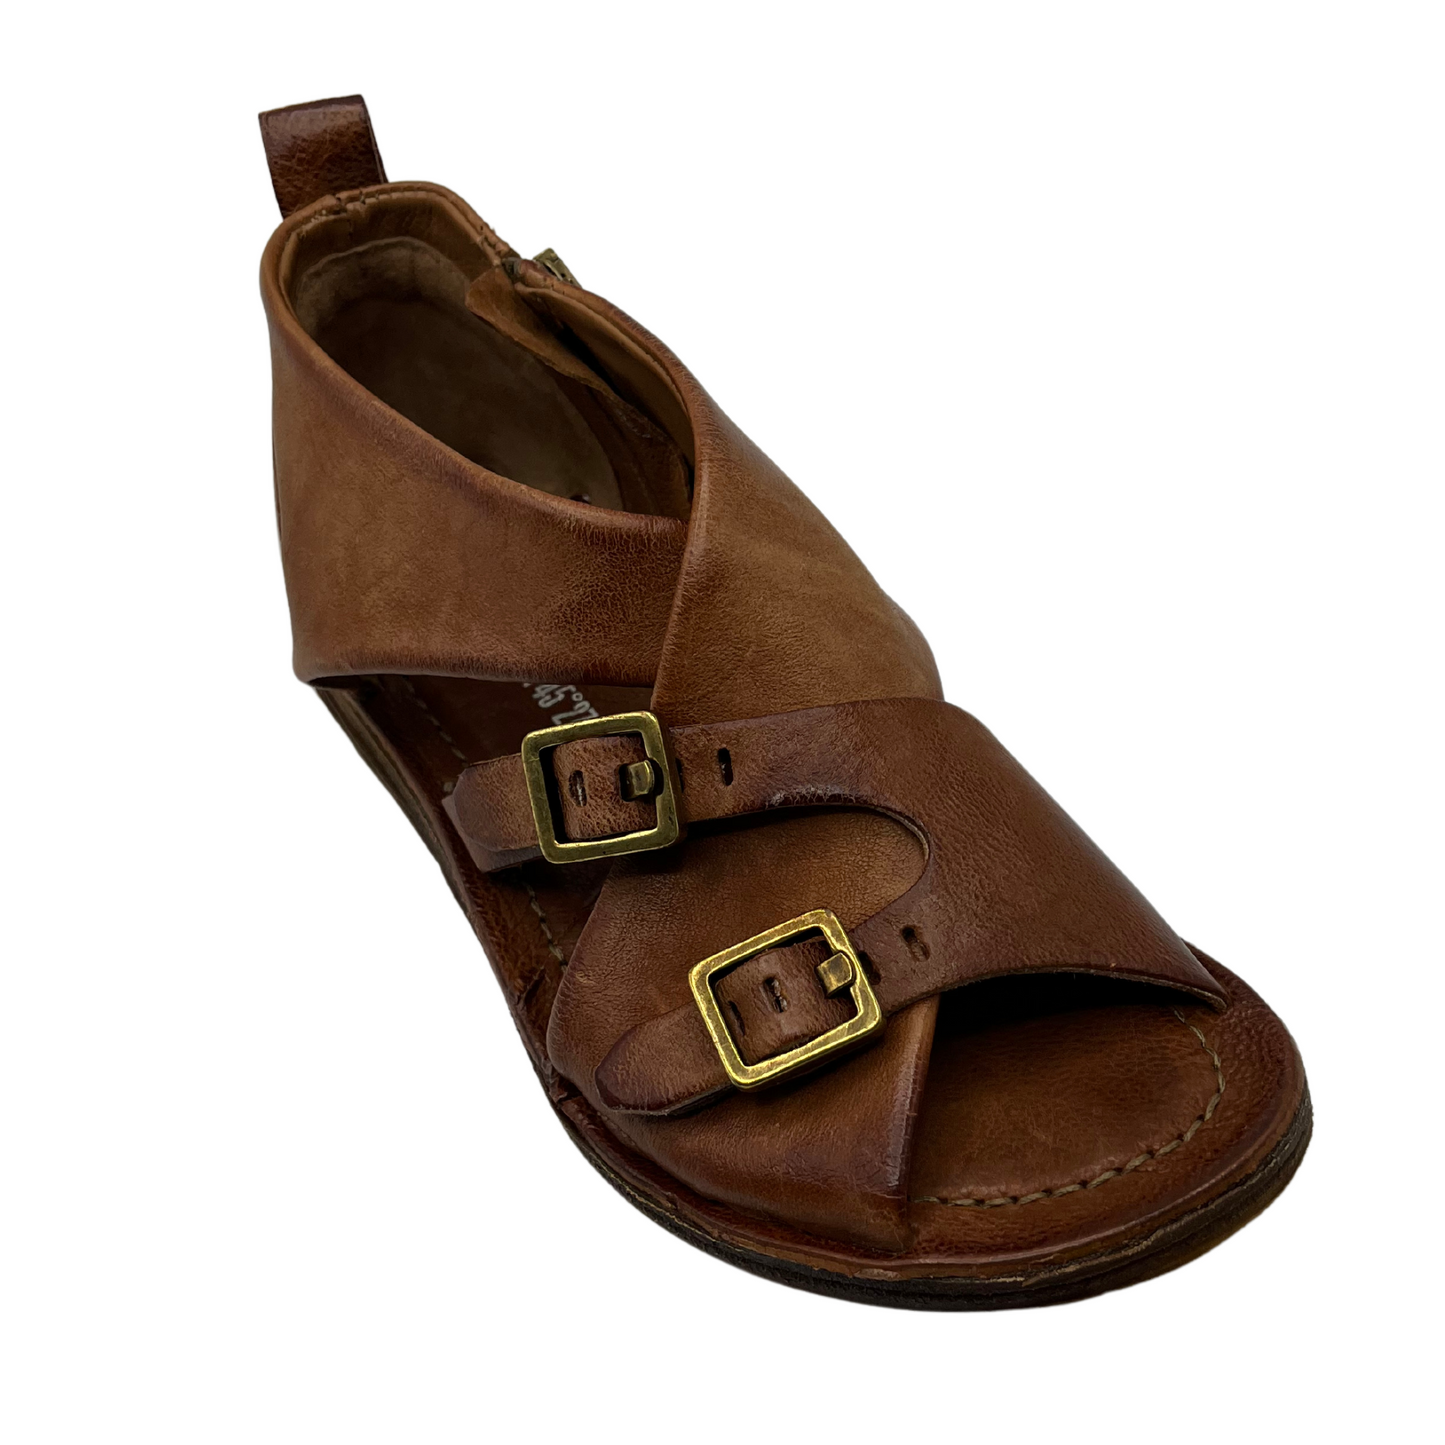 45 degree angled view brown leather flat with two gold buckle straps and leather lining